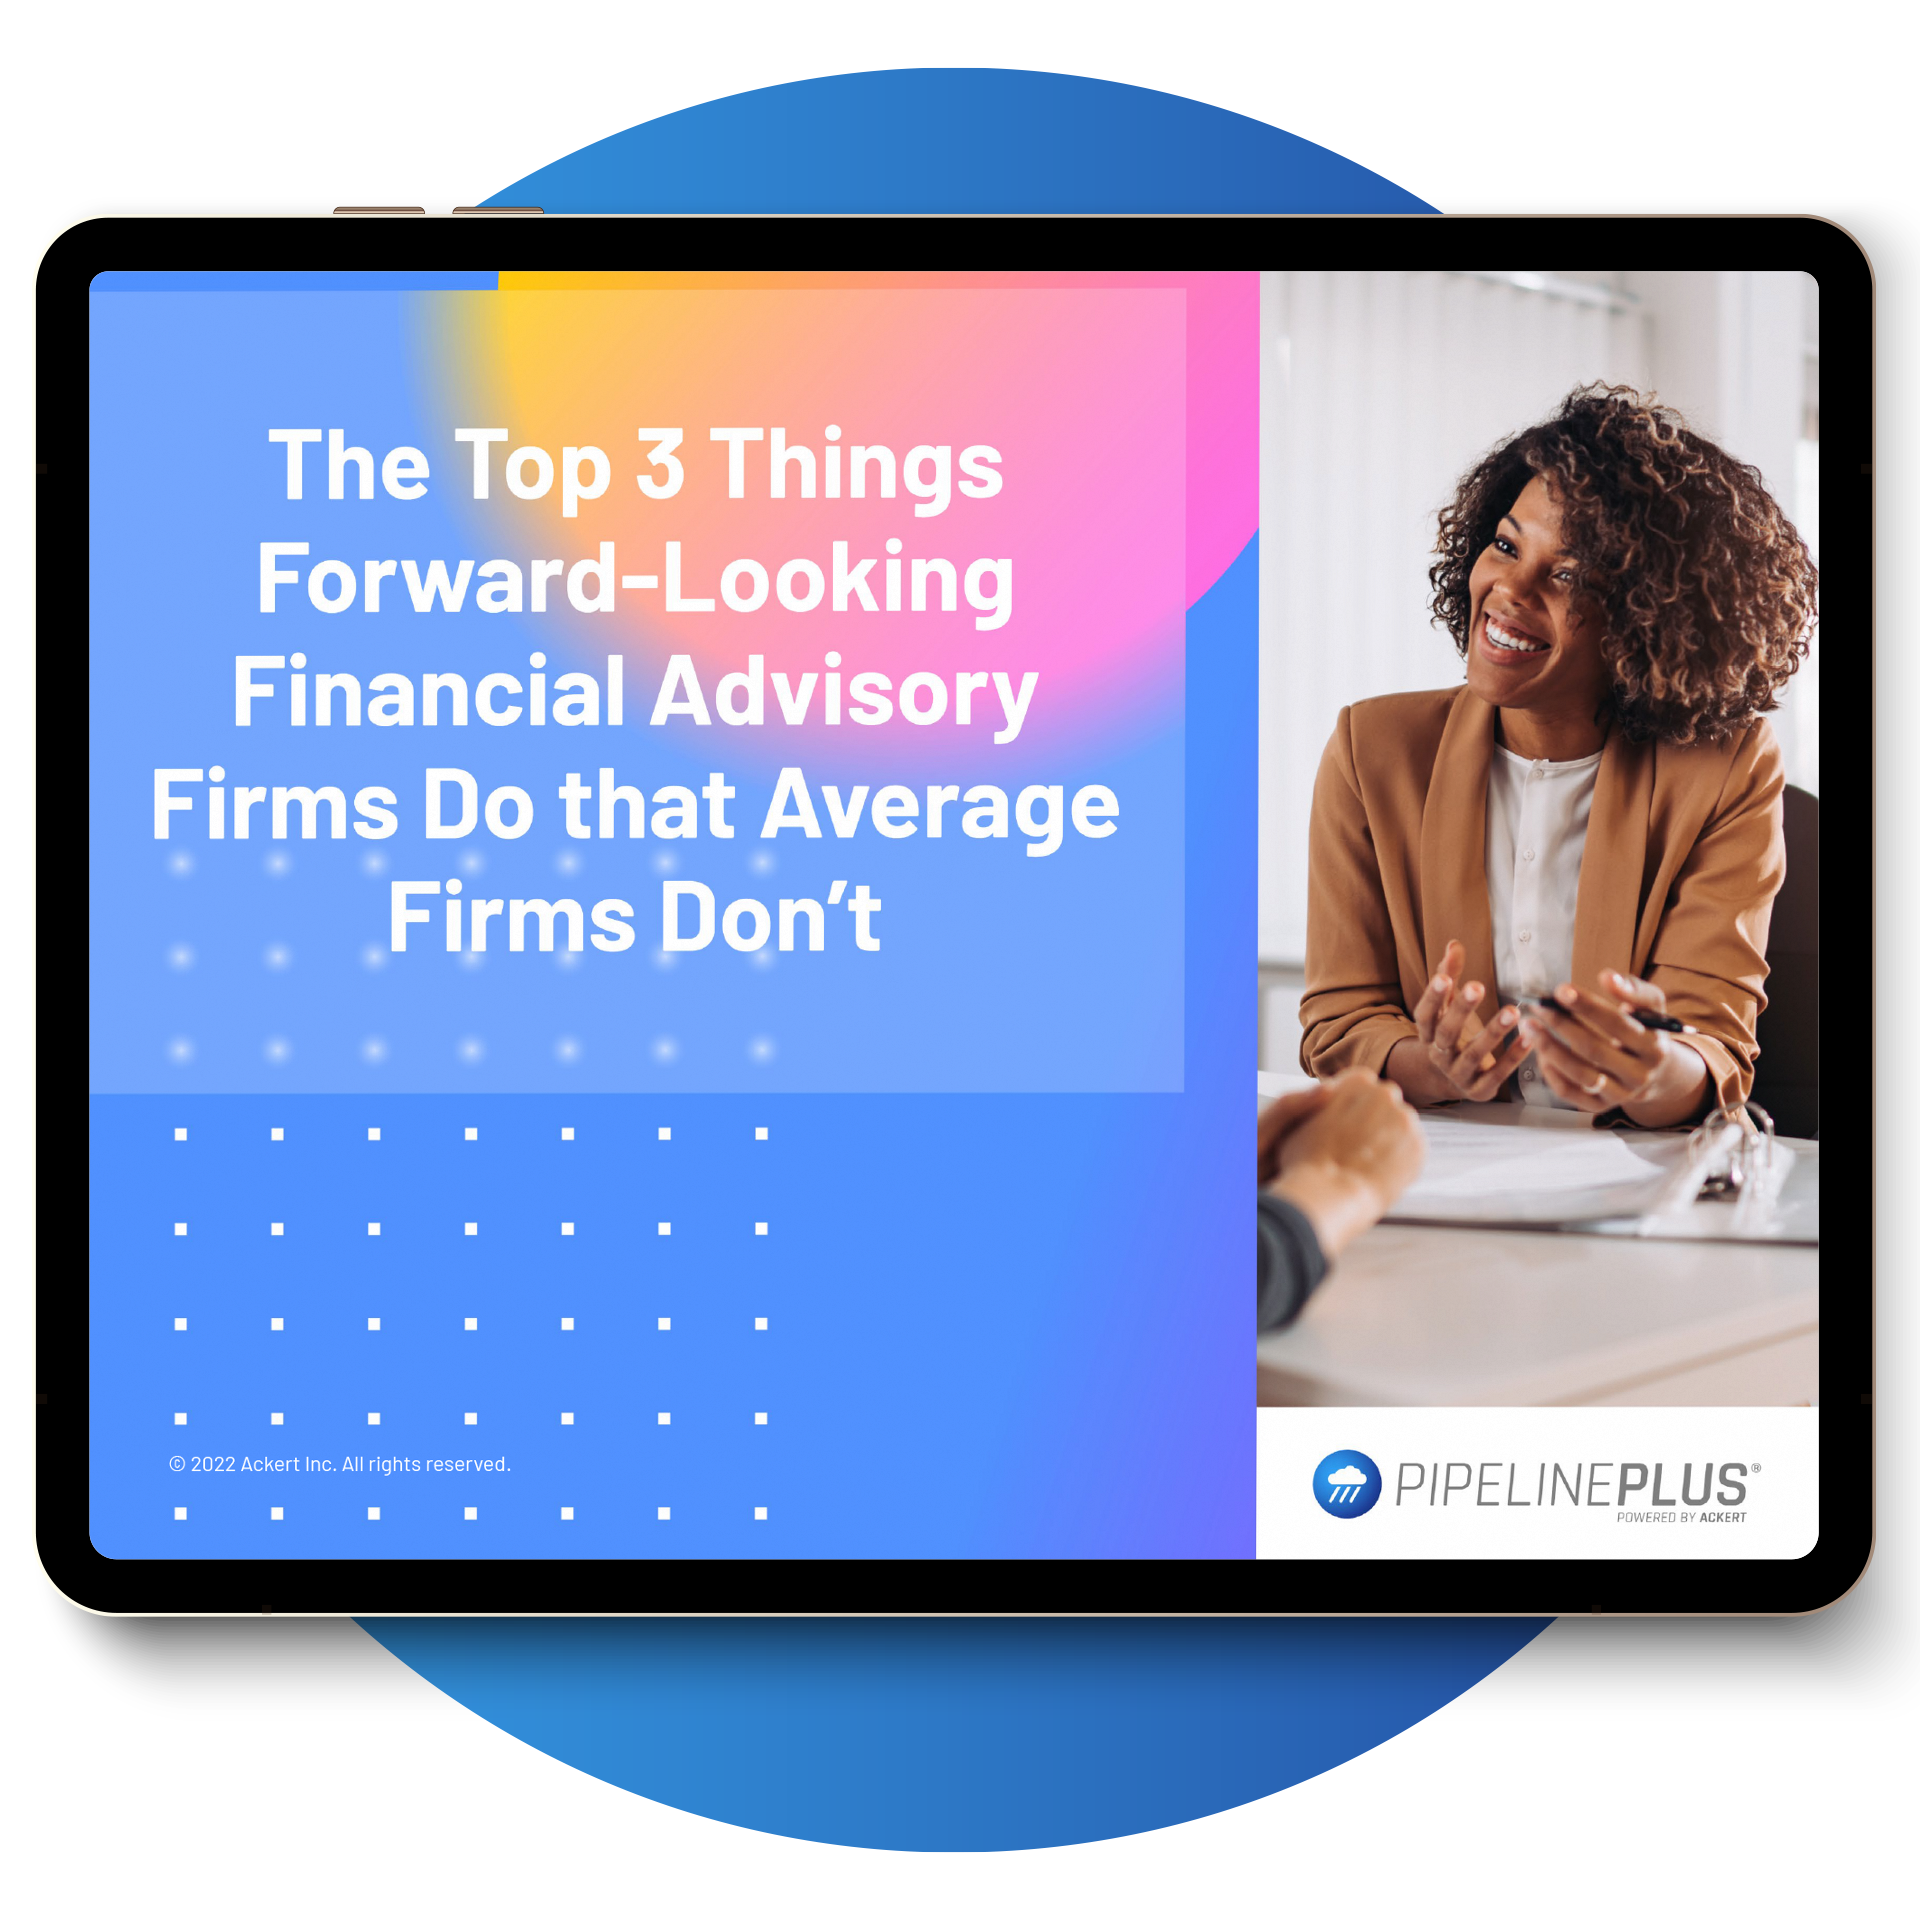 Free Guide Download | The Top 3 Things Forward-Looking Financial Advisory Firms Do that Average Firms Don’t